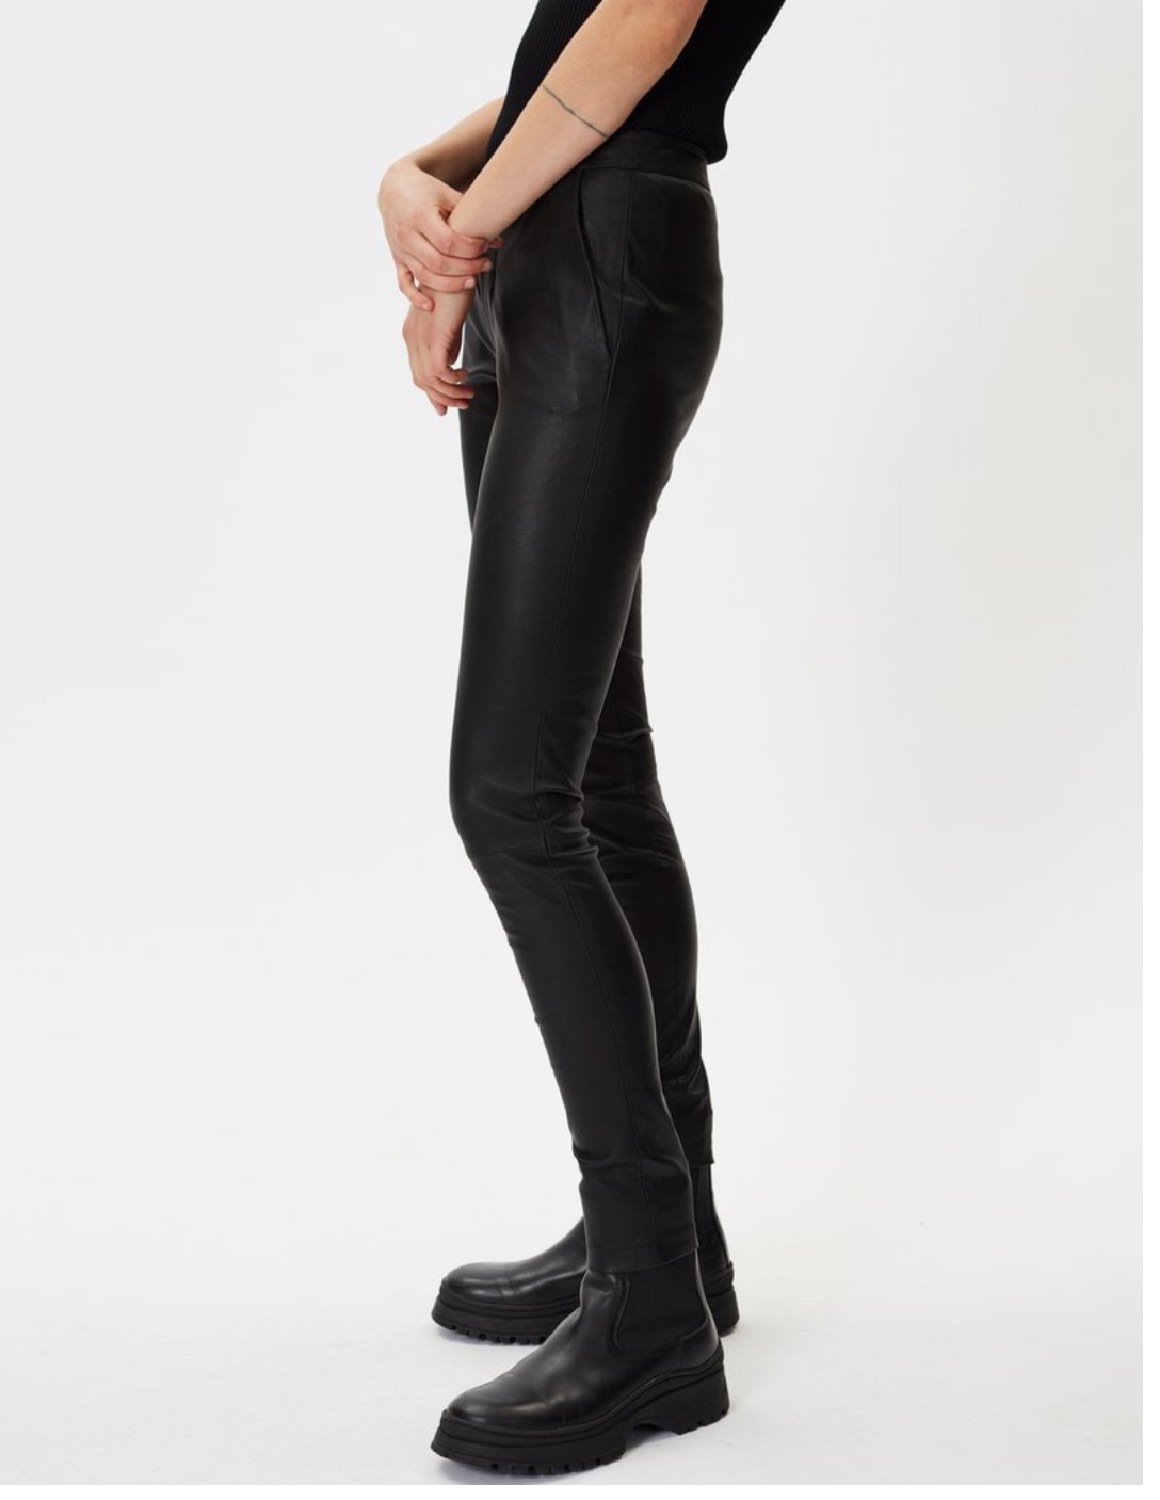 Discover 53+ zara black leather trousers super hot - in.cdgdbentre